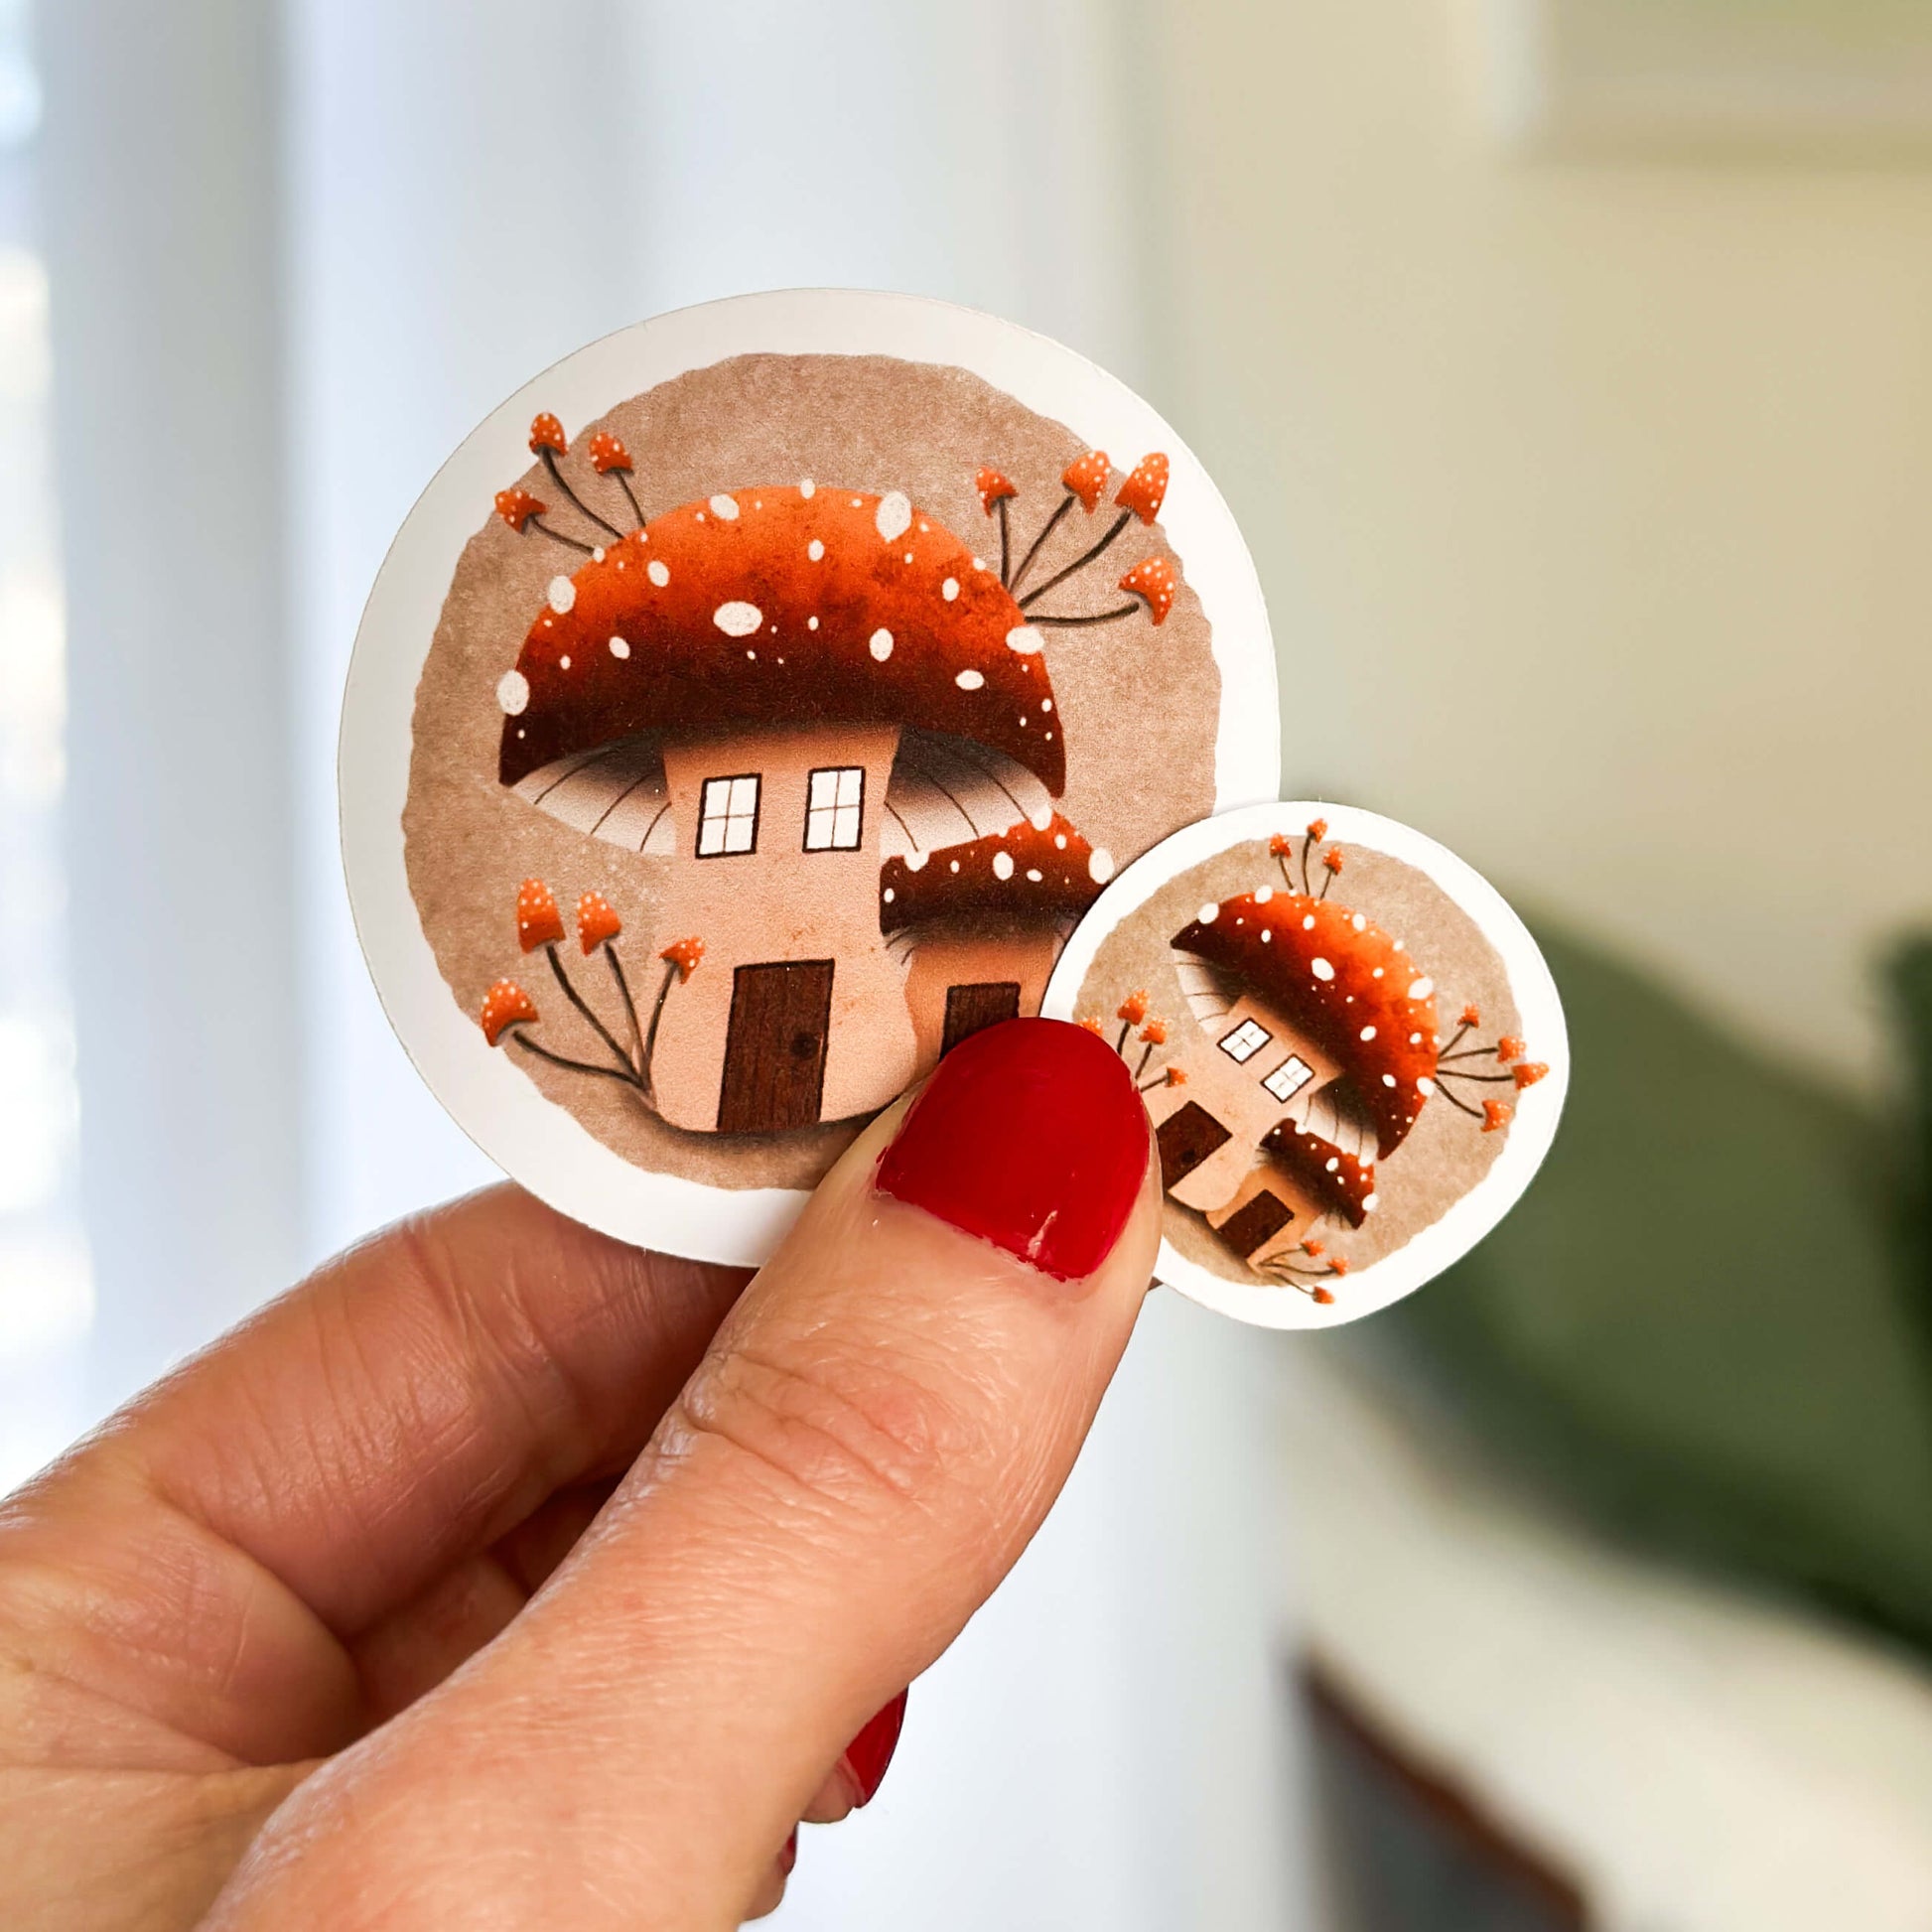 One large and one small mushroom house illustrated stickers